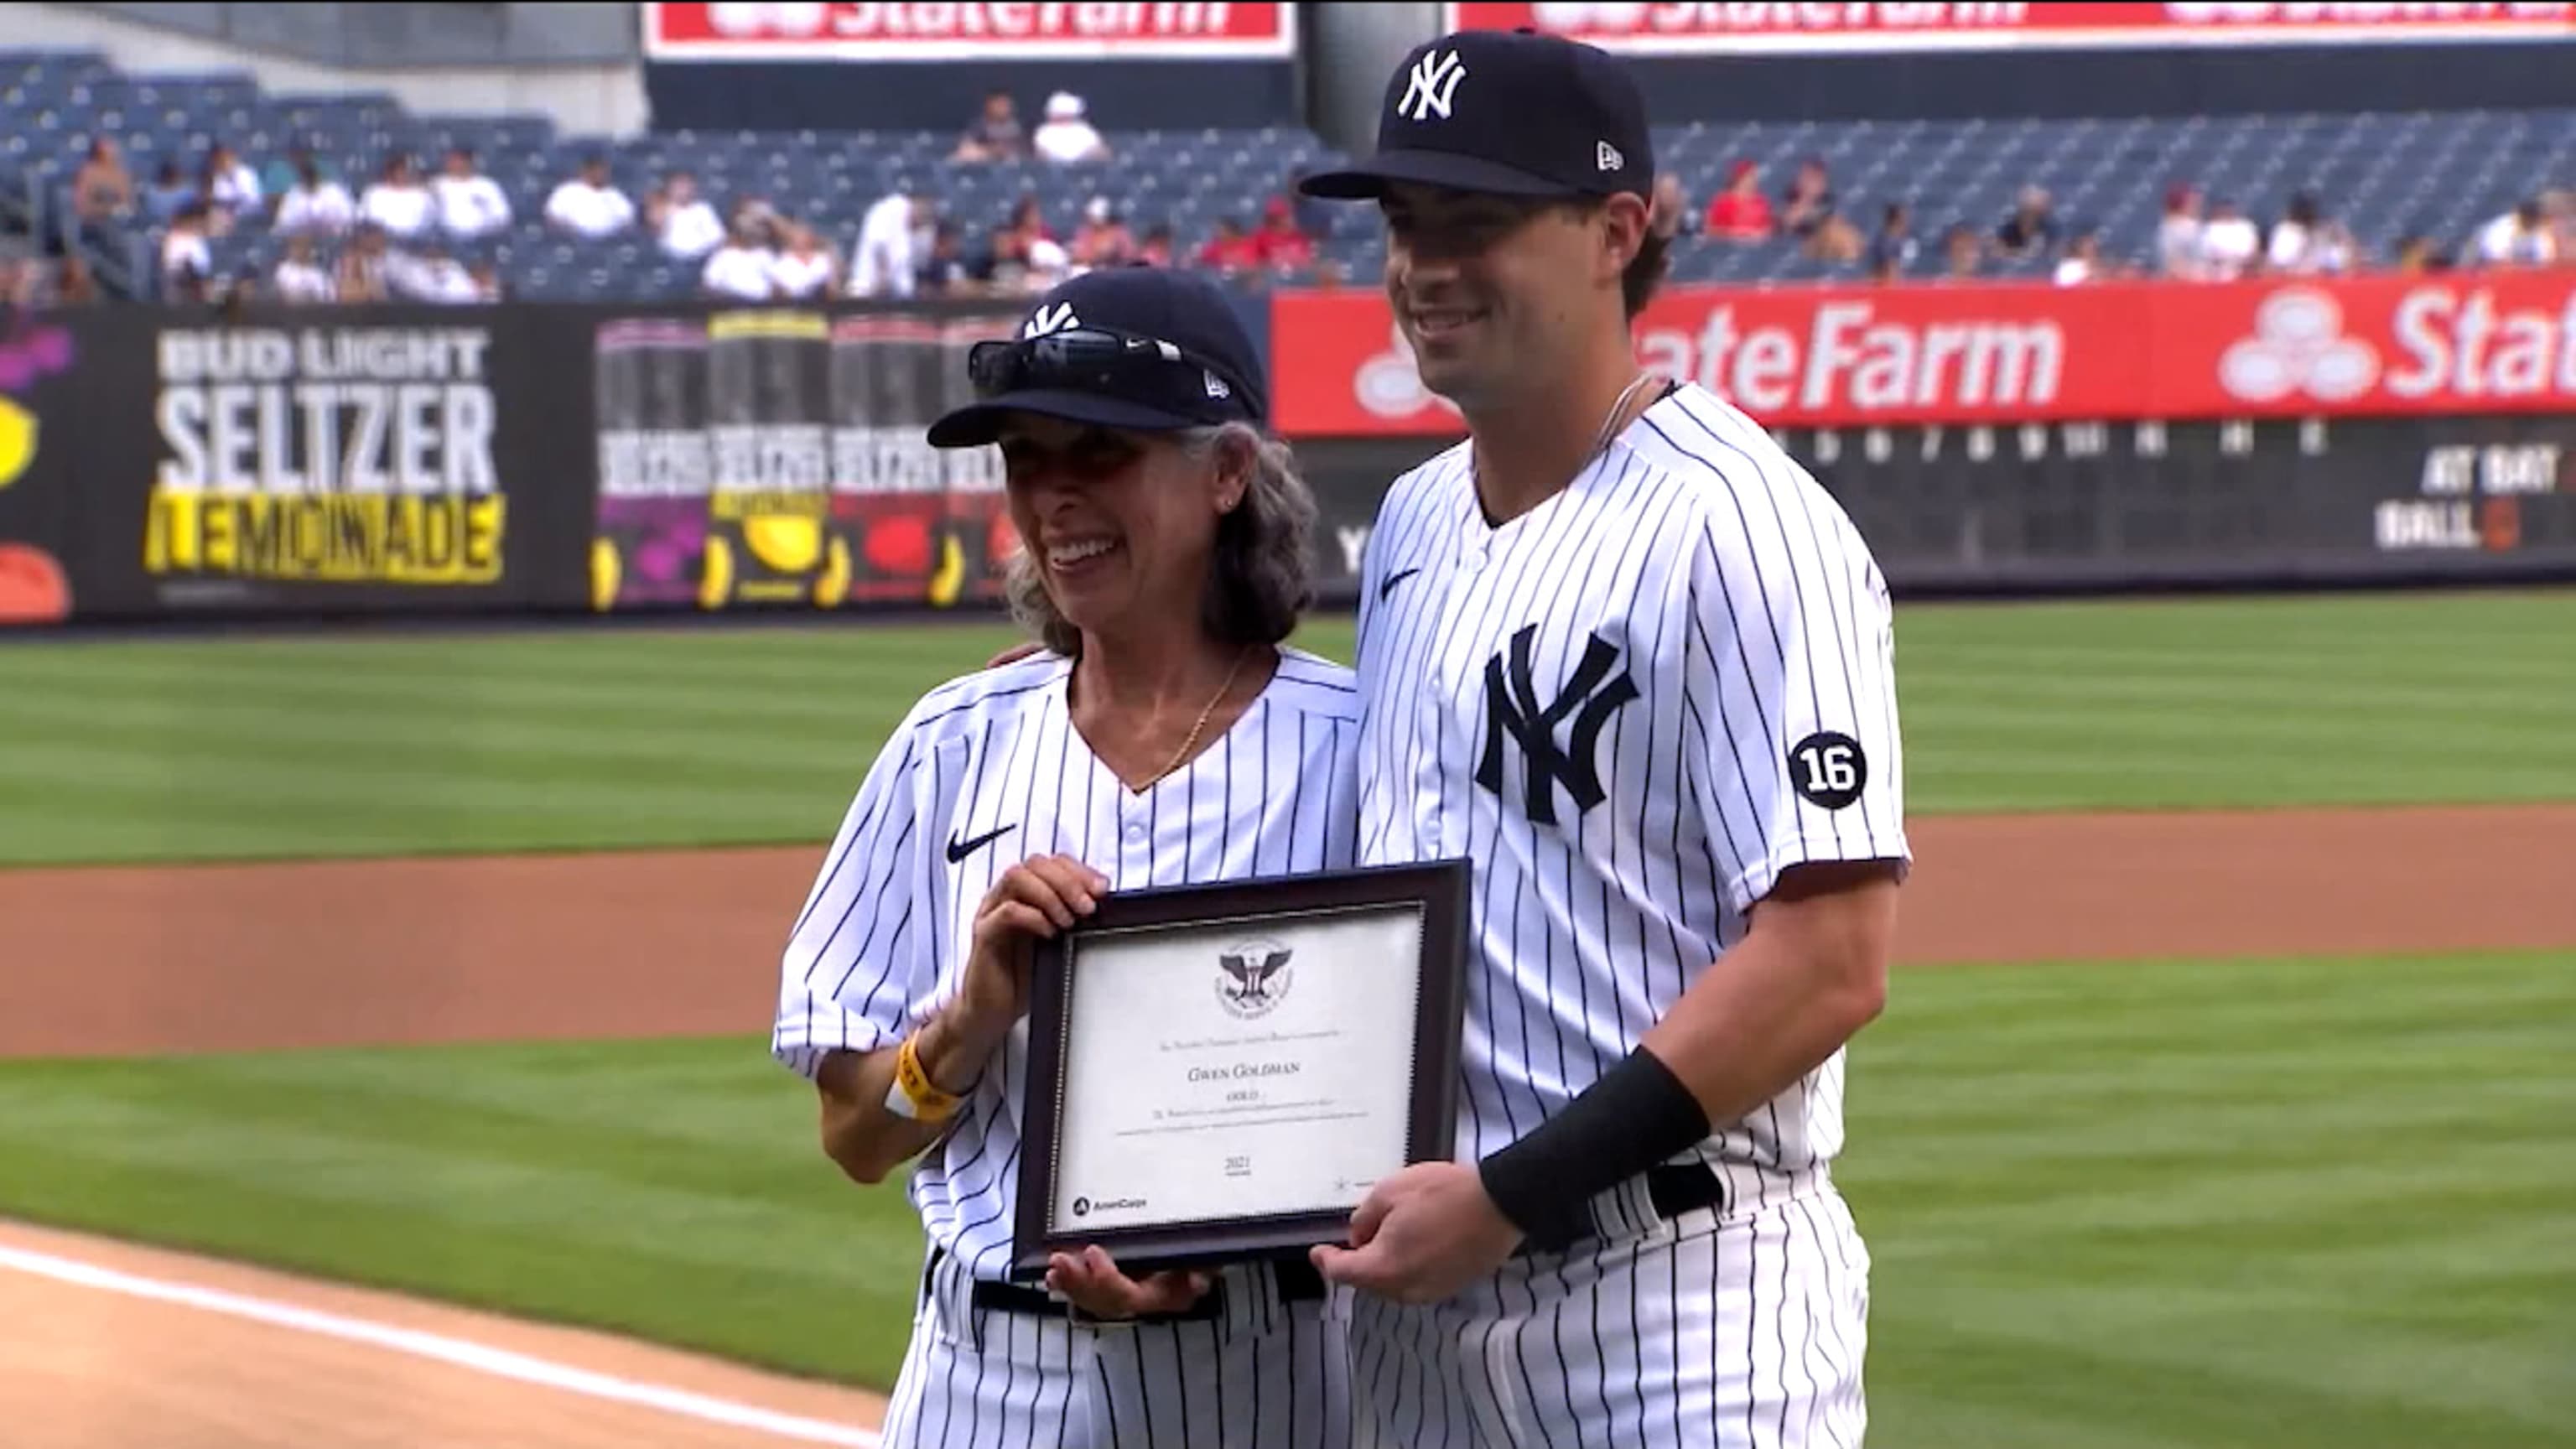 At age 70, Yankees fan gets to live out her dream of being a bat girl